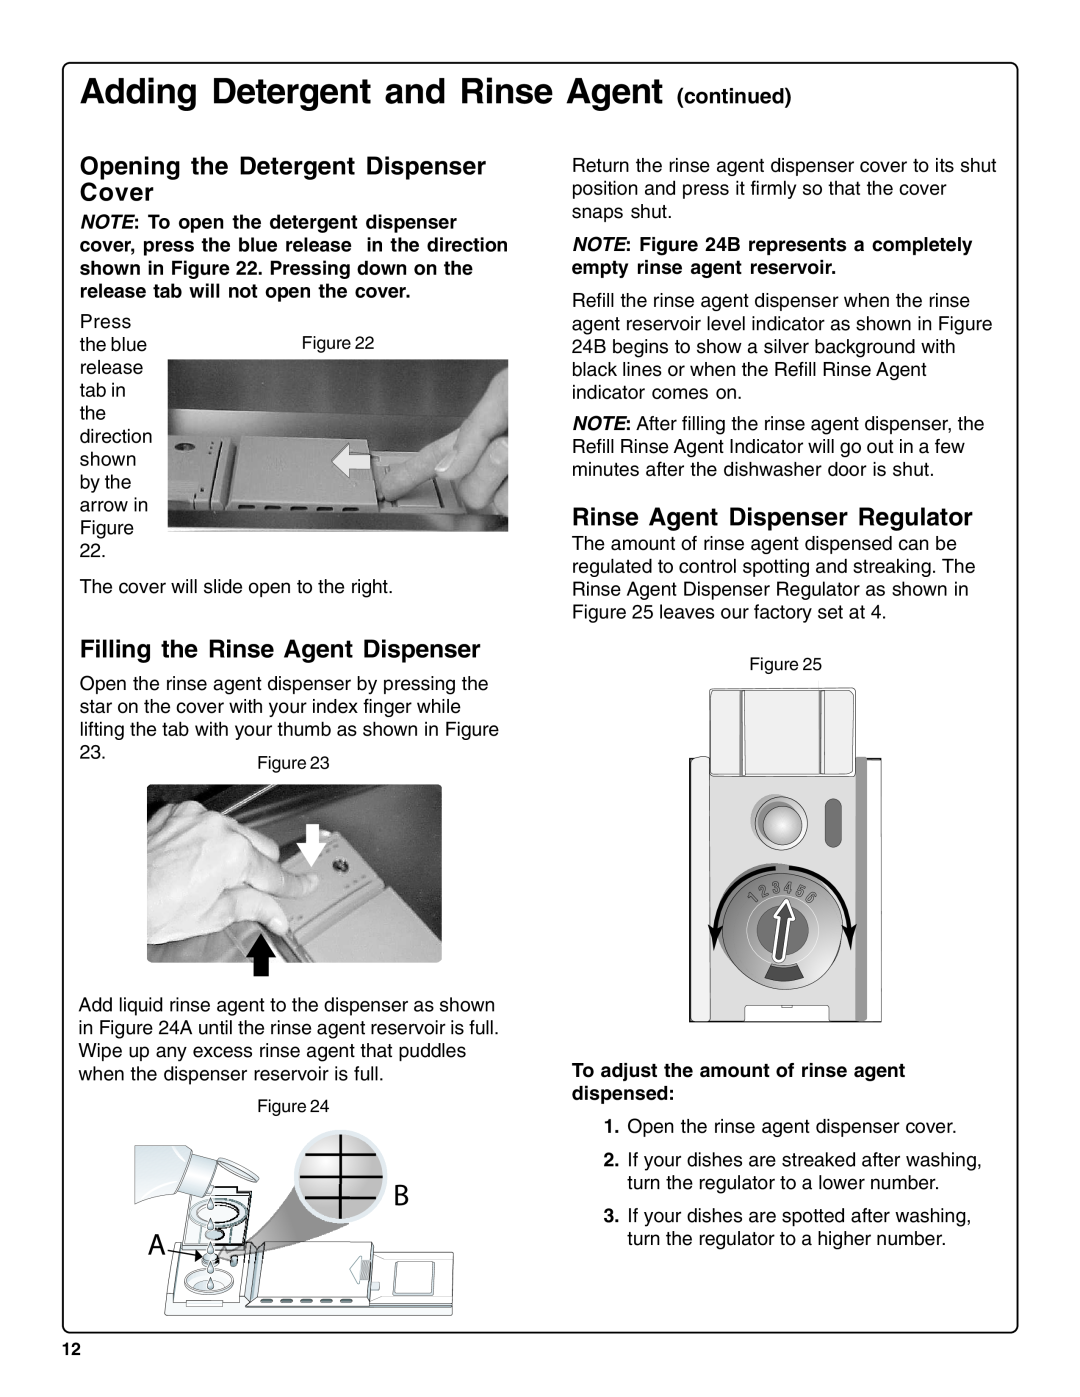 Bosch Appliances SHE66C Adding Detergent and Rinse Agent continued, Opening the Detergent Dispenser Cover 